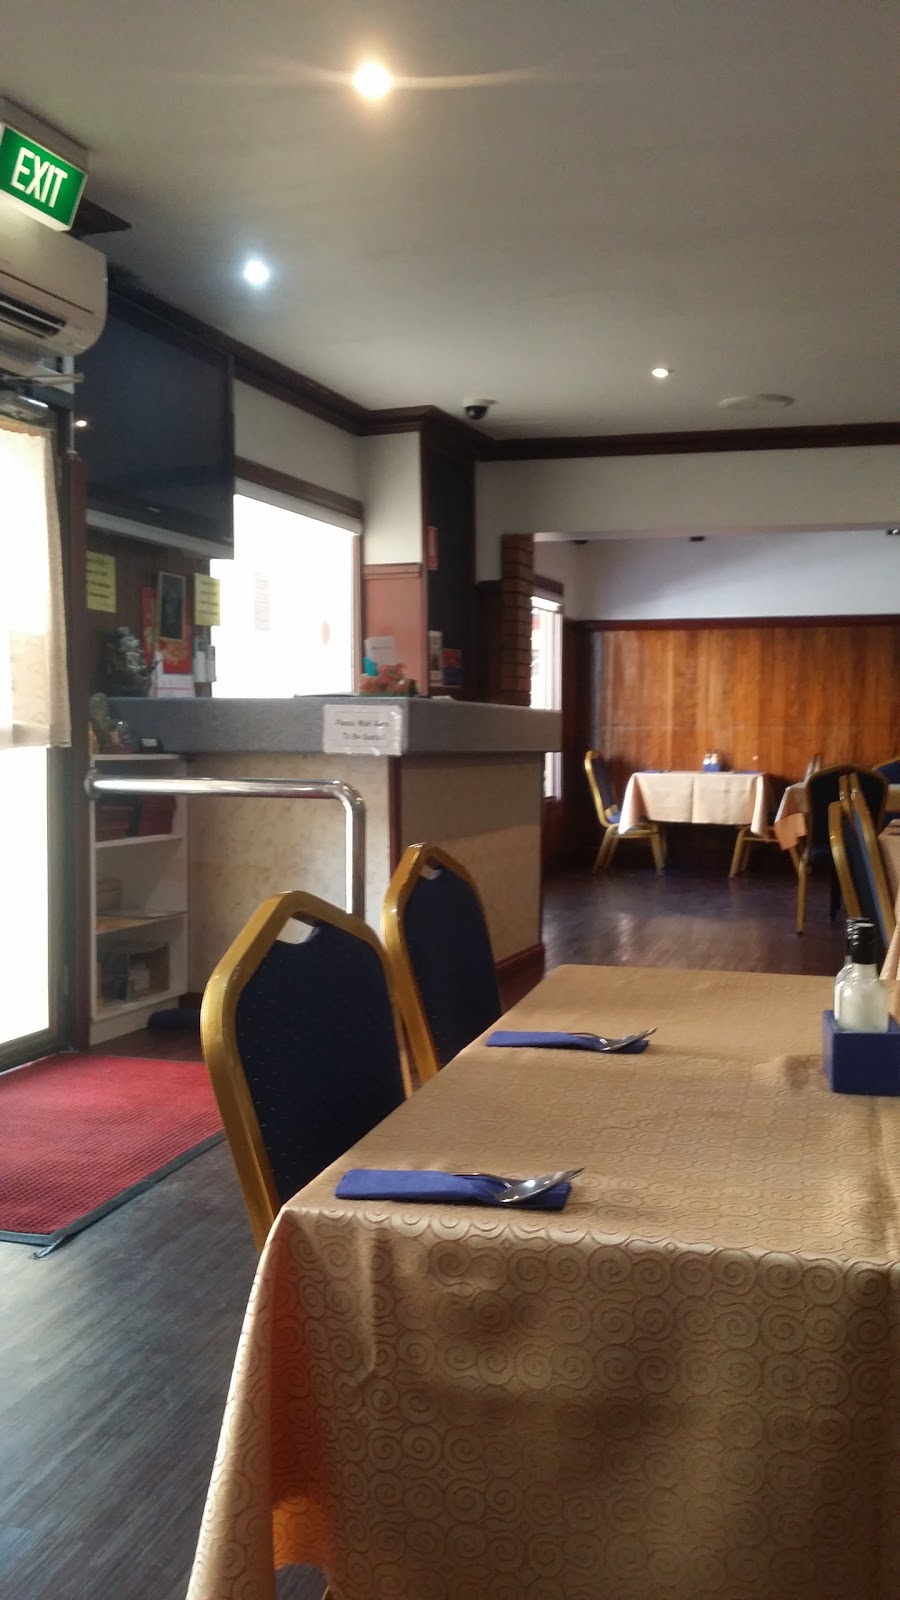 Lam and May Chinese Restaurant | restaurant | 151 Main St, West Wyalong NSW 2671, Australia | 0422866881 OR +61 422 866 881